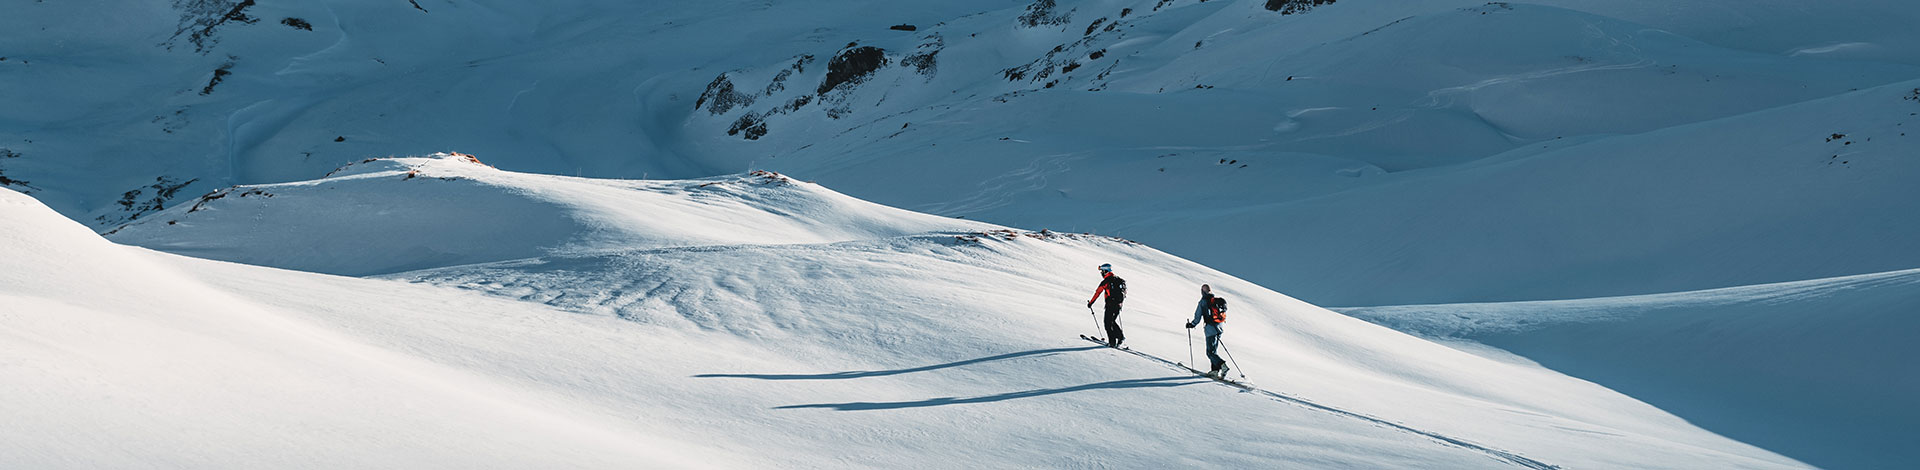 ski touring in the 3 valleys